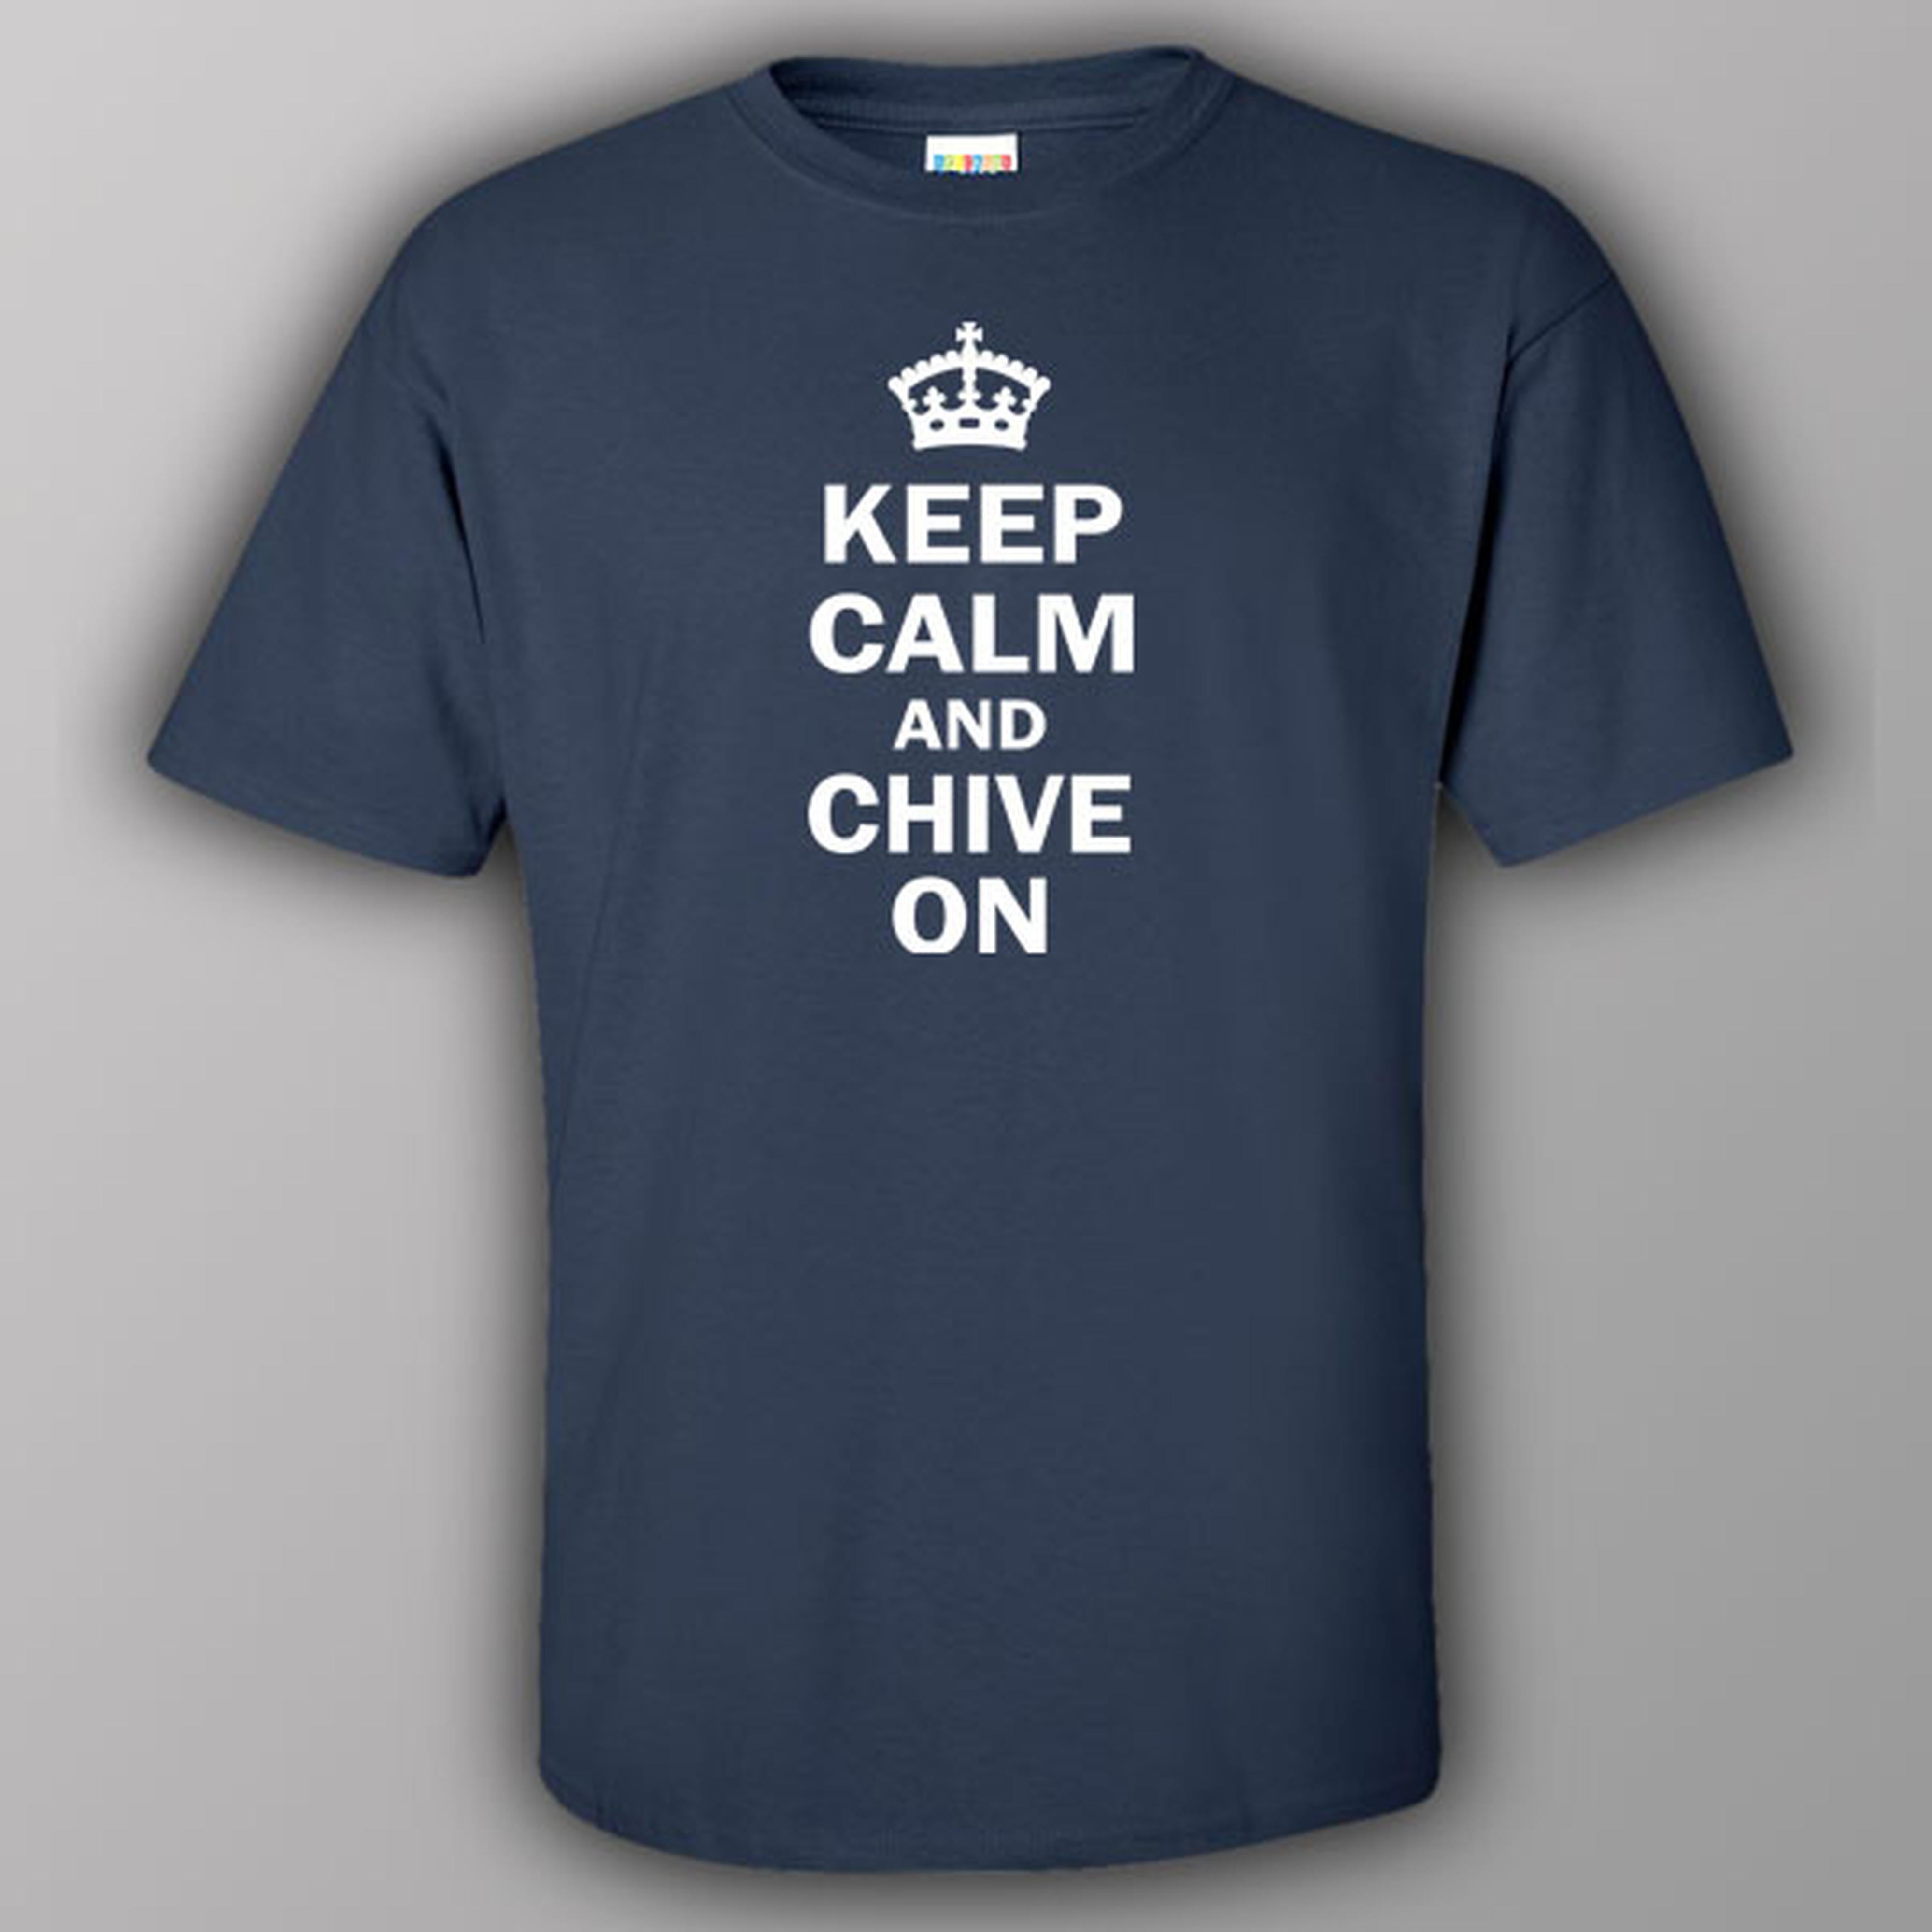 Keep calm and chive on - T-shirt